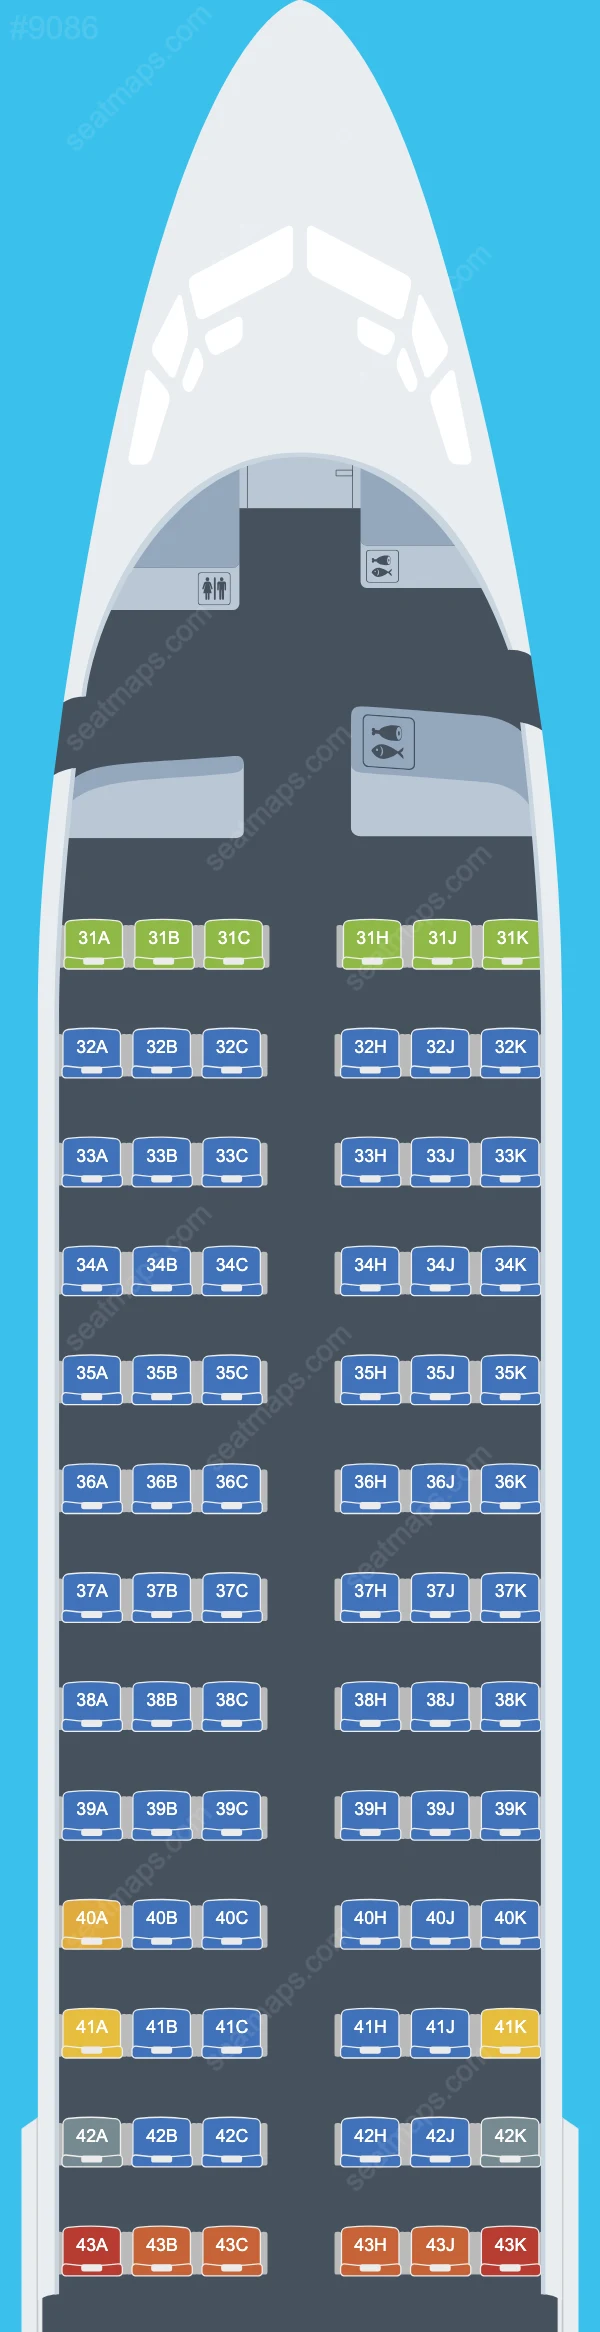 Suparna Airlines Boeing 737-800 aircraft seat map  737-800 V.2